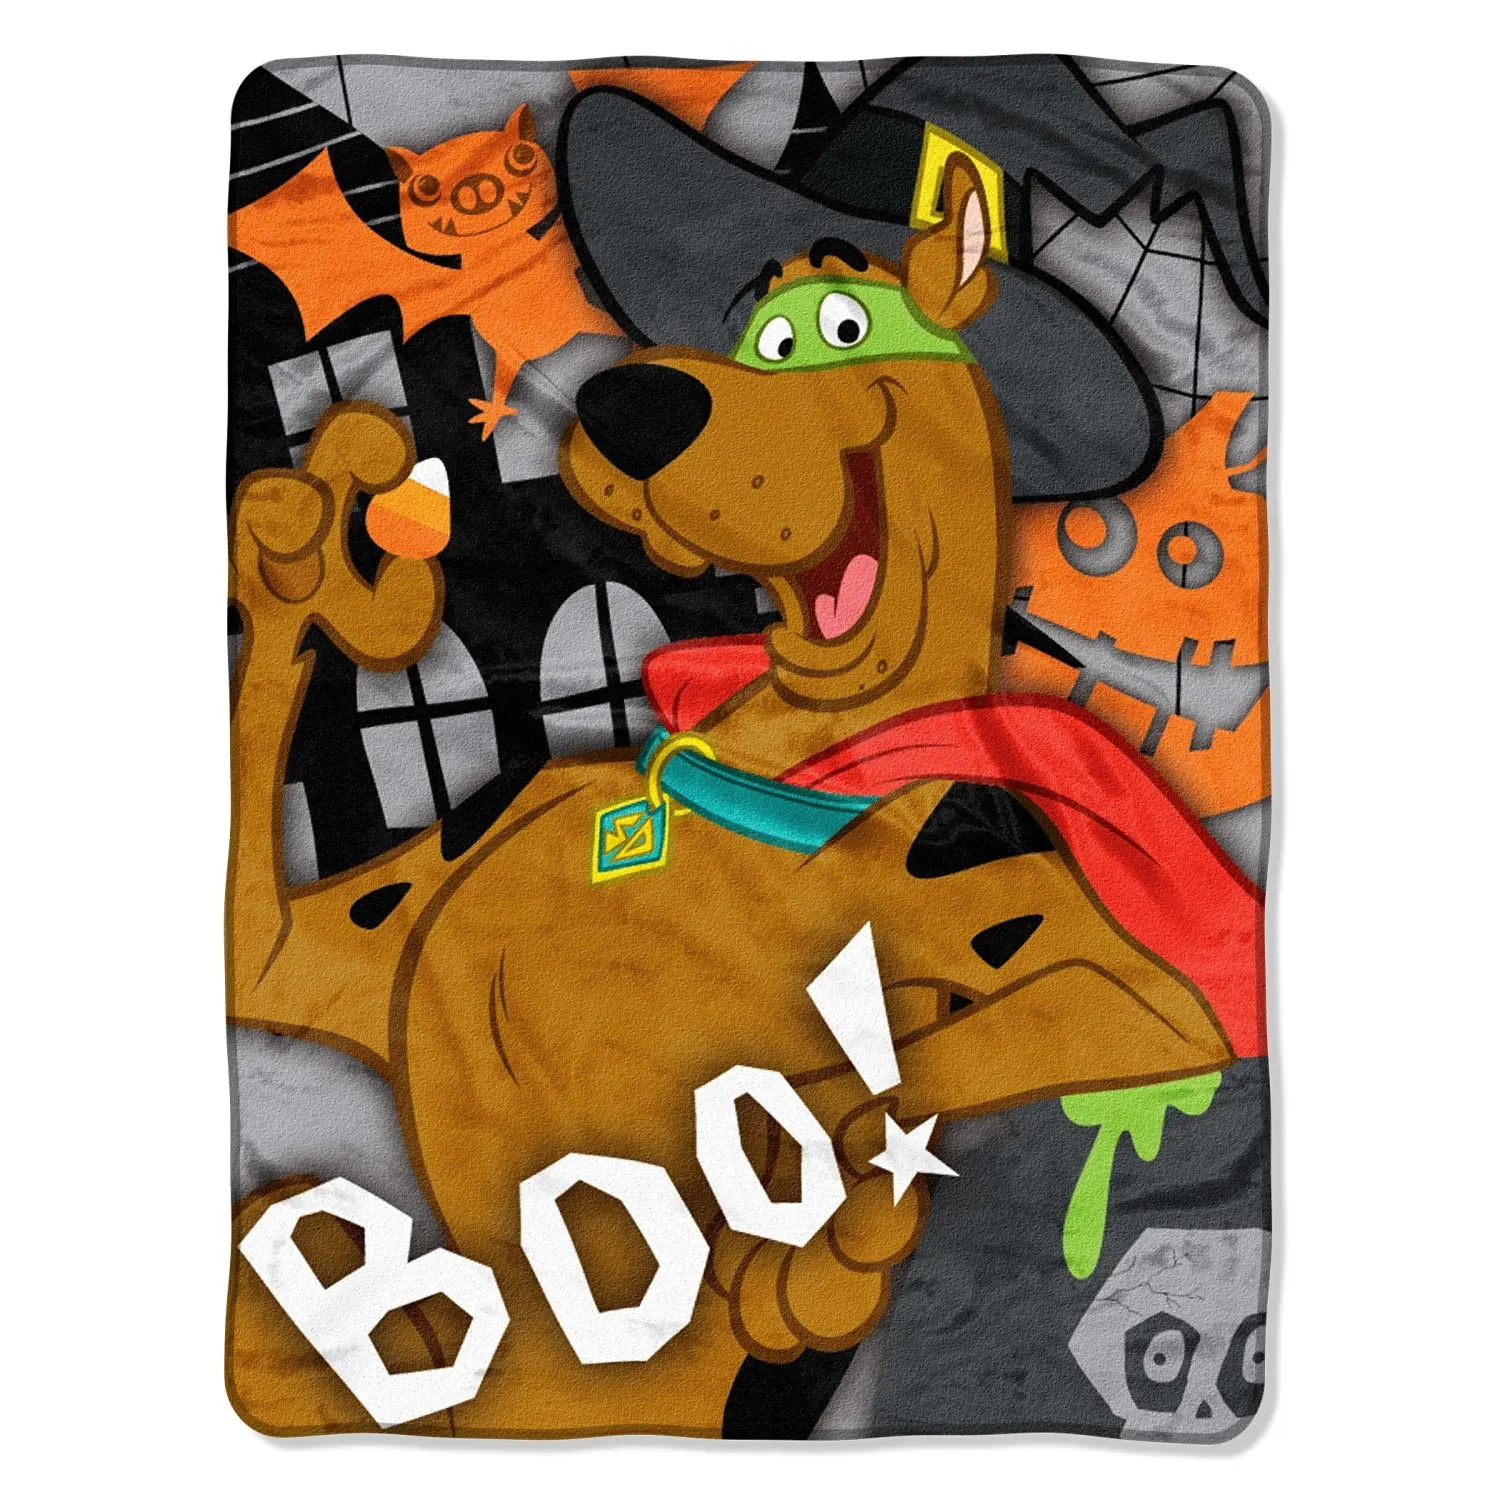 Buy Warner Brothers 31038 Scooby Doo Beanbag In Cheap Price On